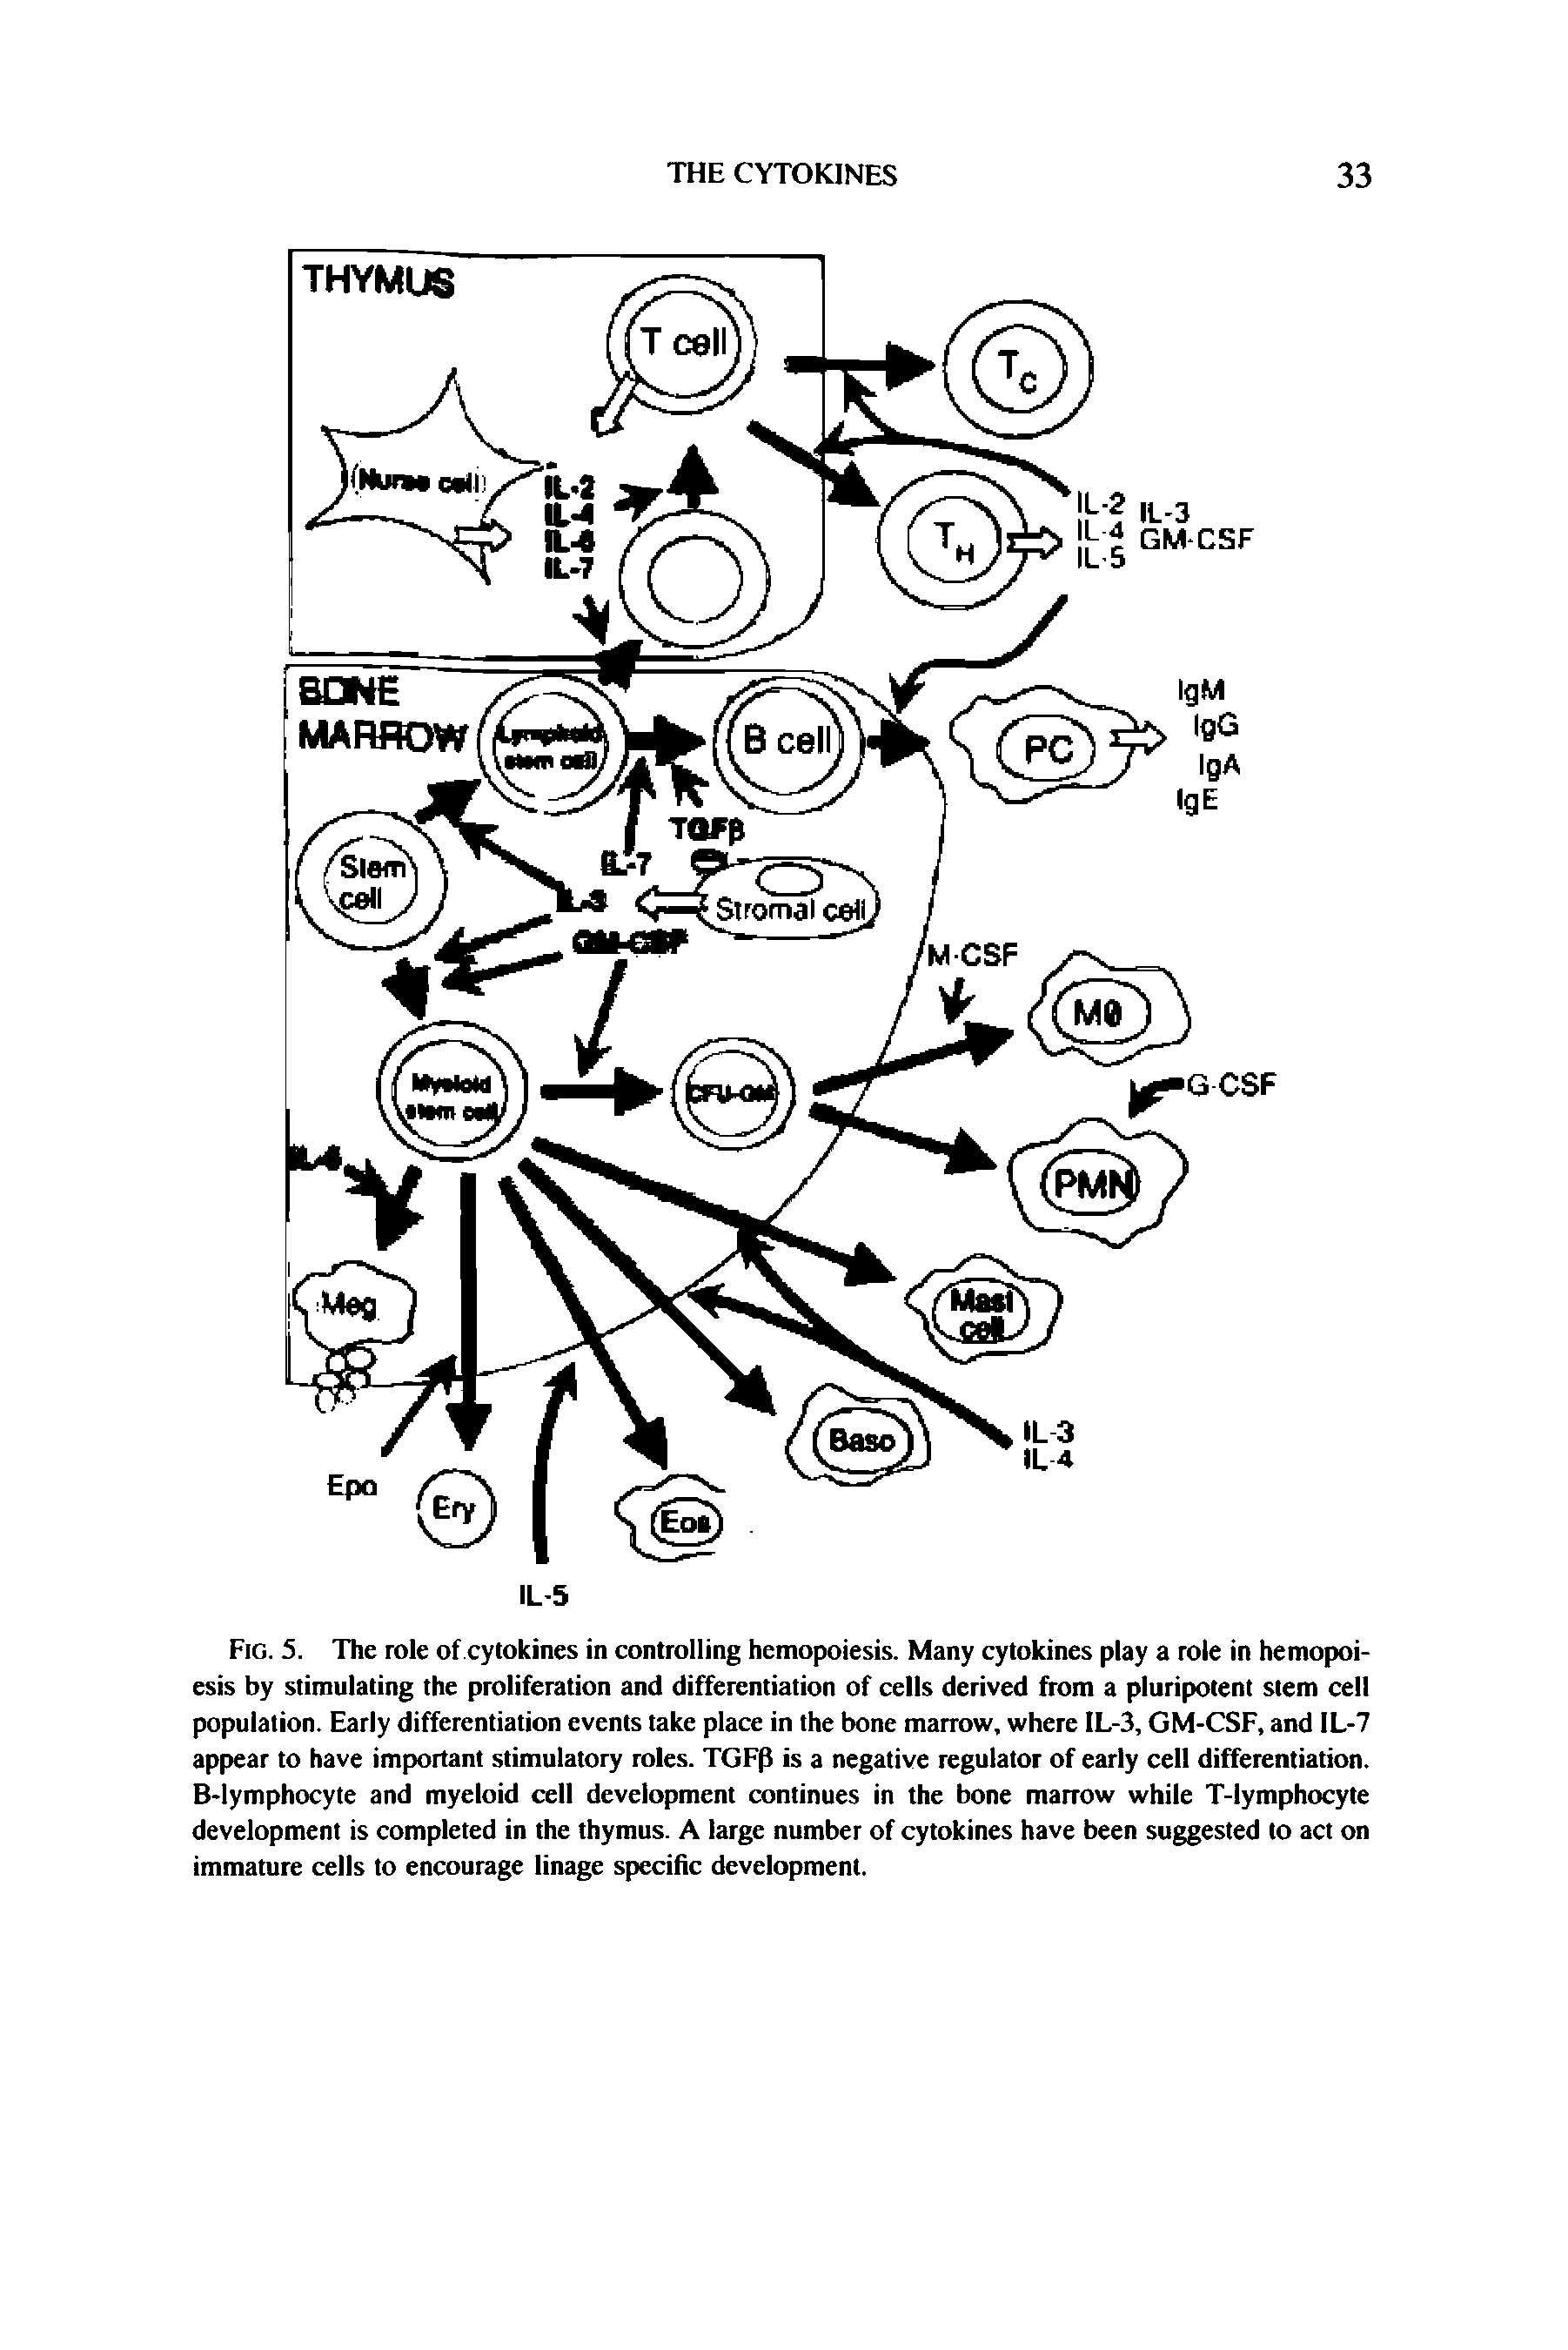 Fig. 5. The role of cytokines in controlling hemopoiesis. Many cytokines play a role in hemopoiesis by stimulating the proliferation and differentiation of cells derived from a pluripotent stem cell population. Early differentiation events take place in the bone marrow, where IL-3, GM-CSF, and IL-7 appear to have important stimulatory roles. TGFp is a negative regulator of early cell differentiation. B-lymphocyte and myeloid cell development continues in the bone marrow while T-lymphocyte development is completed in the thymus. A large number of cytokines have been suggested to act on immature cells to encourage linage specific development.